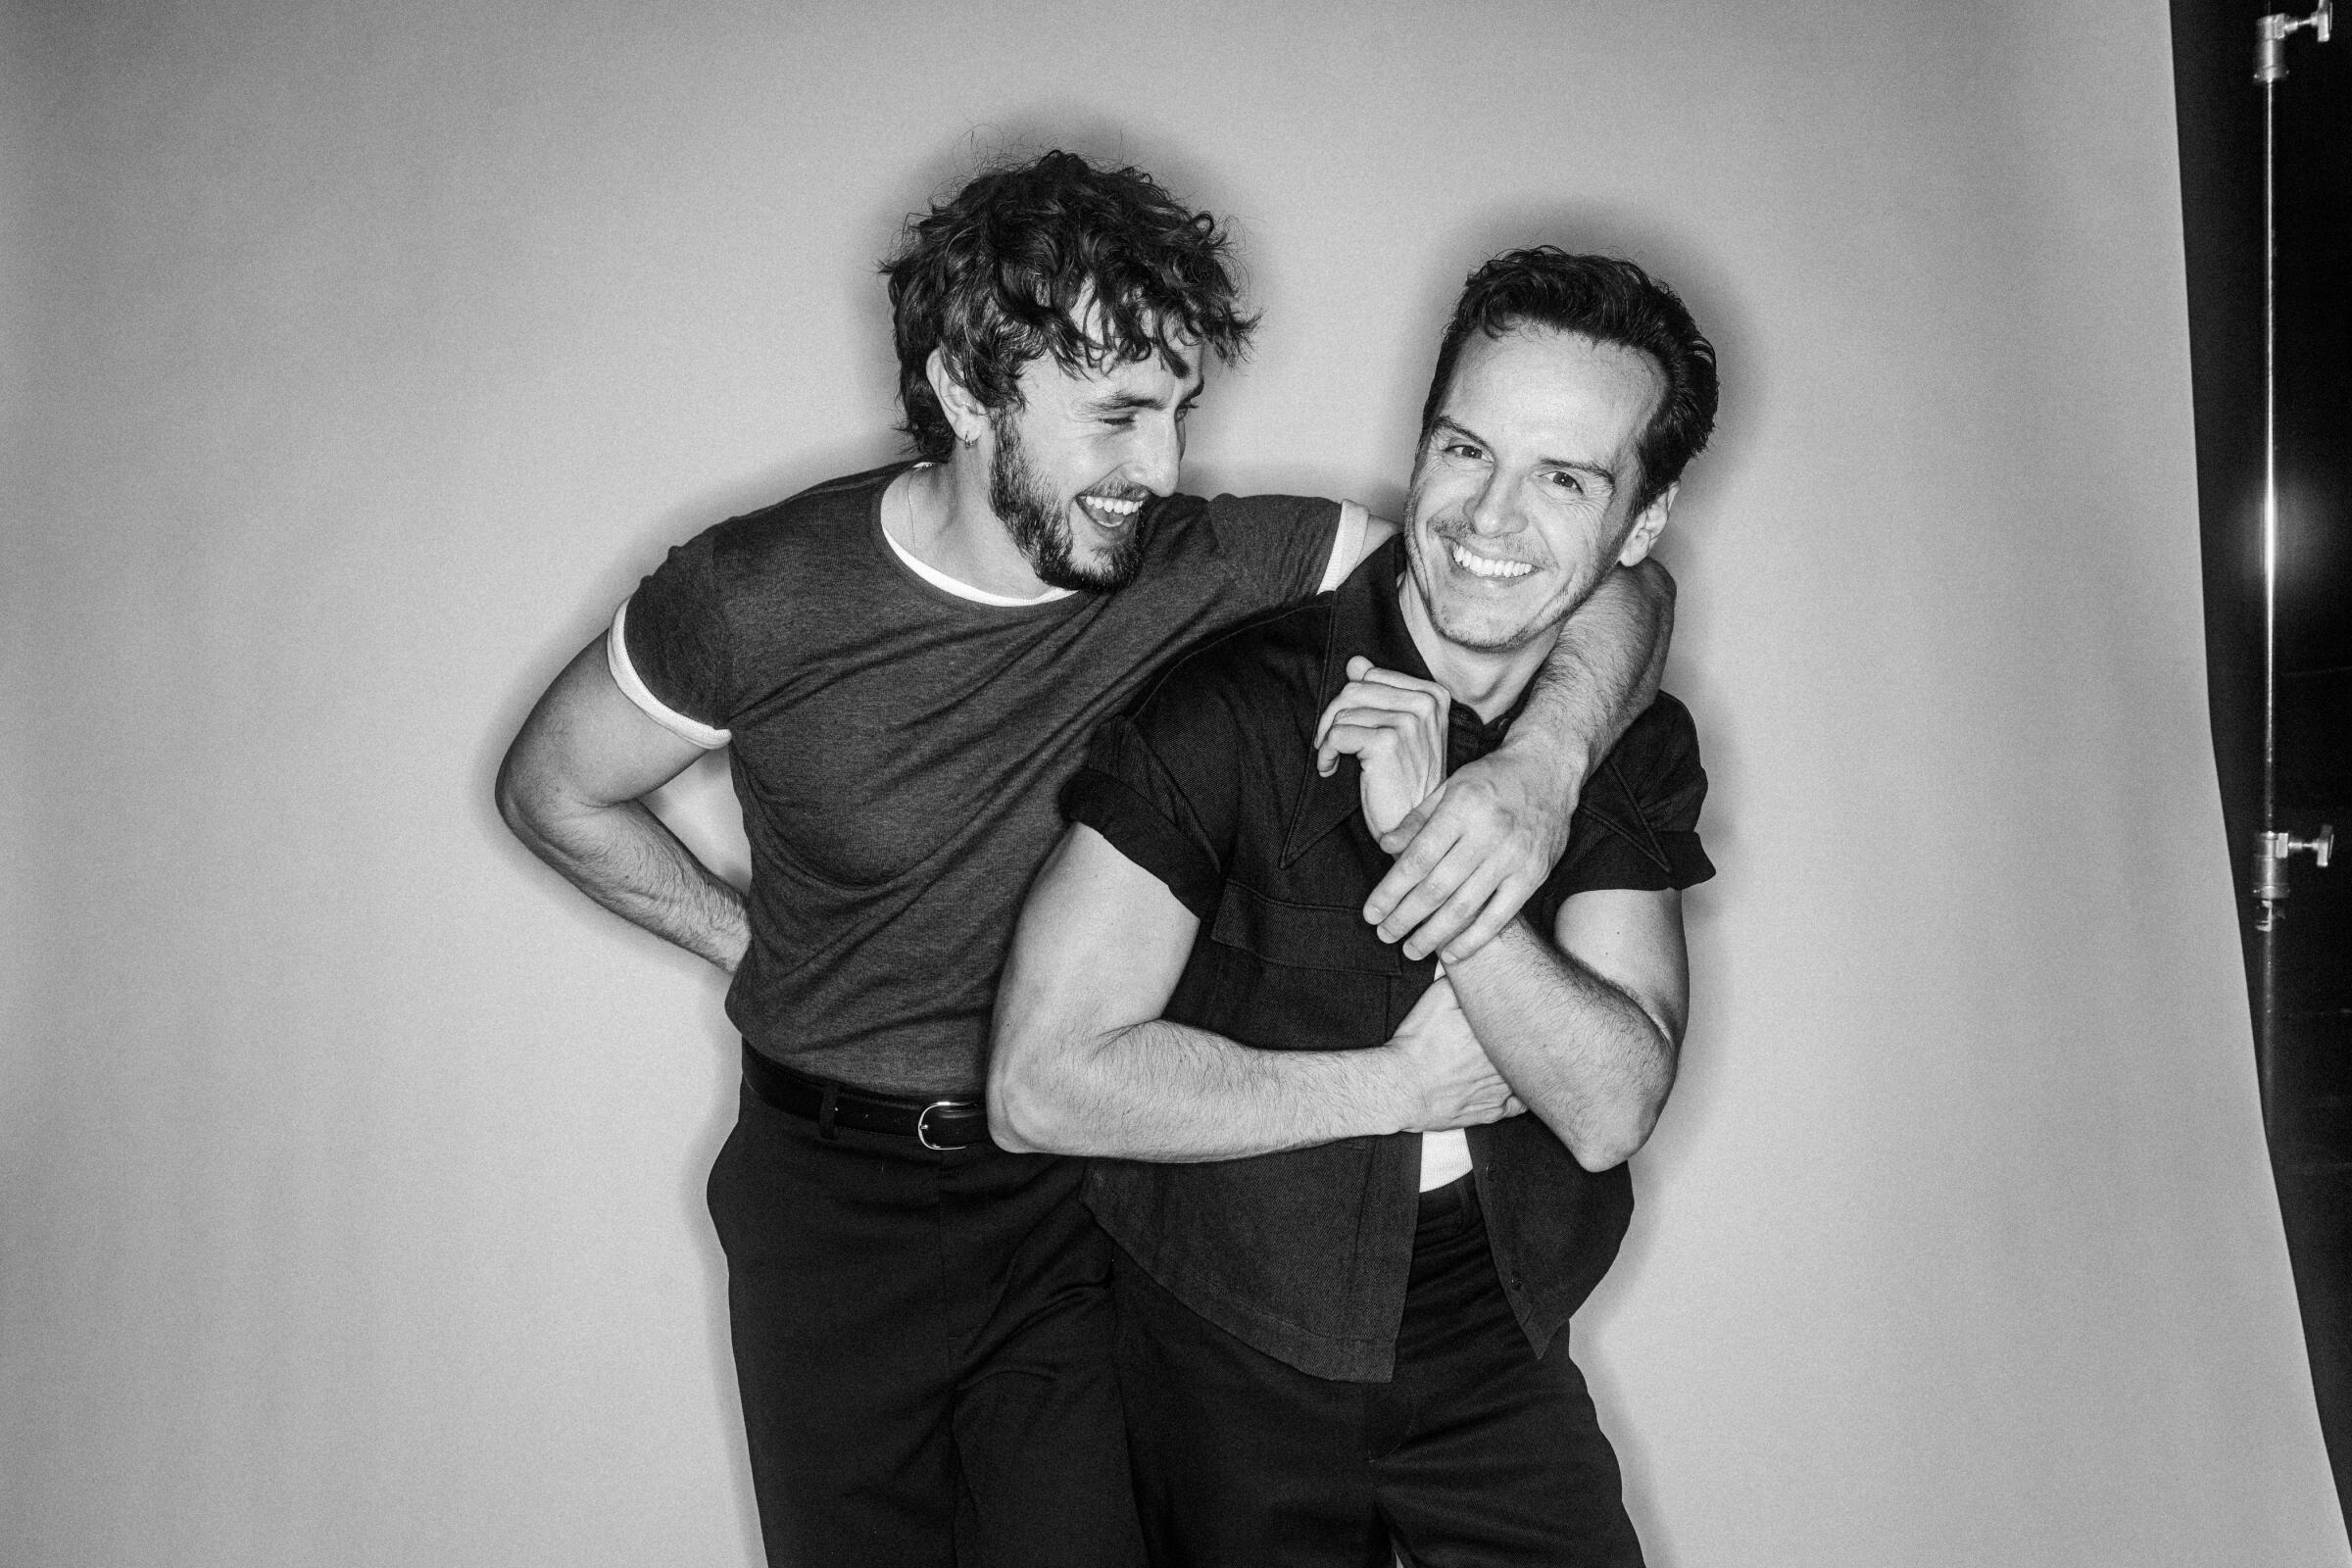 Andrew Scott and Paul Mescal laugh while posing for a portrait together.